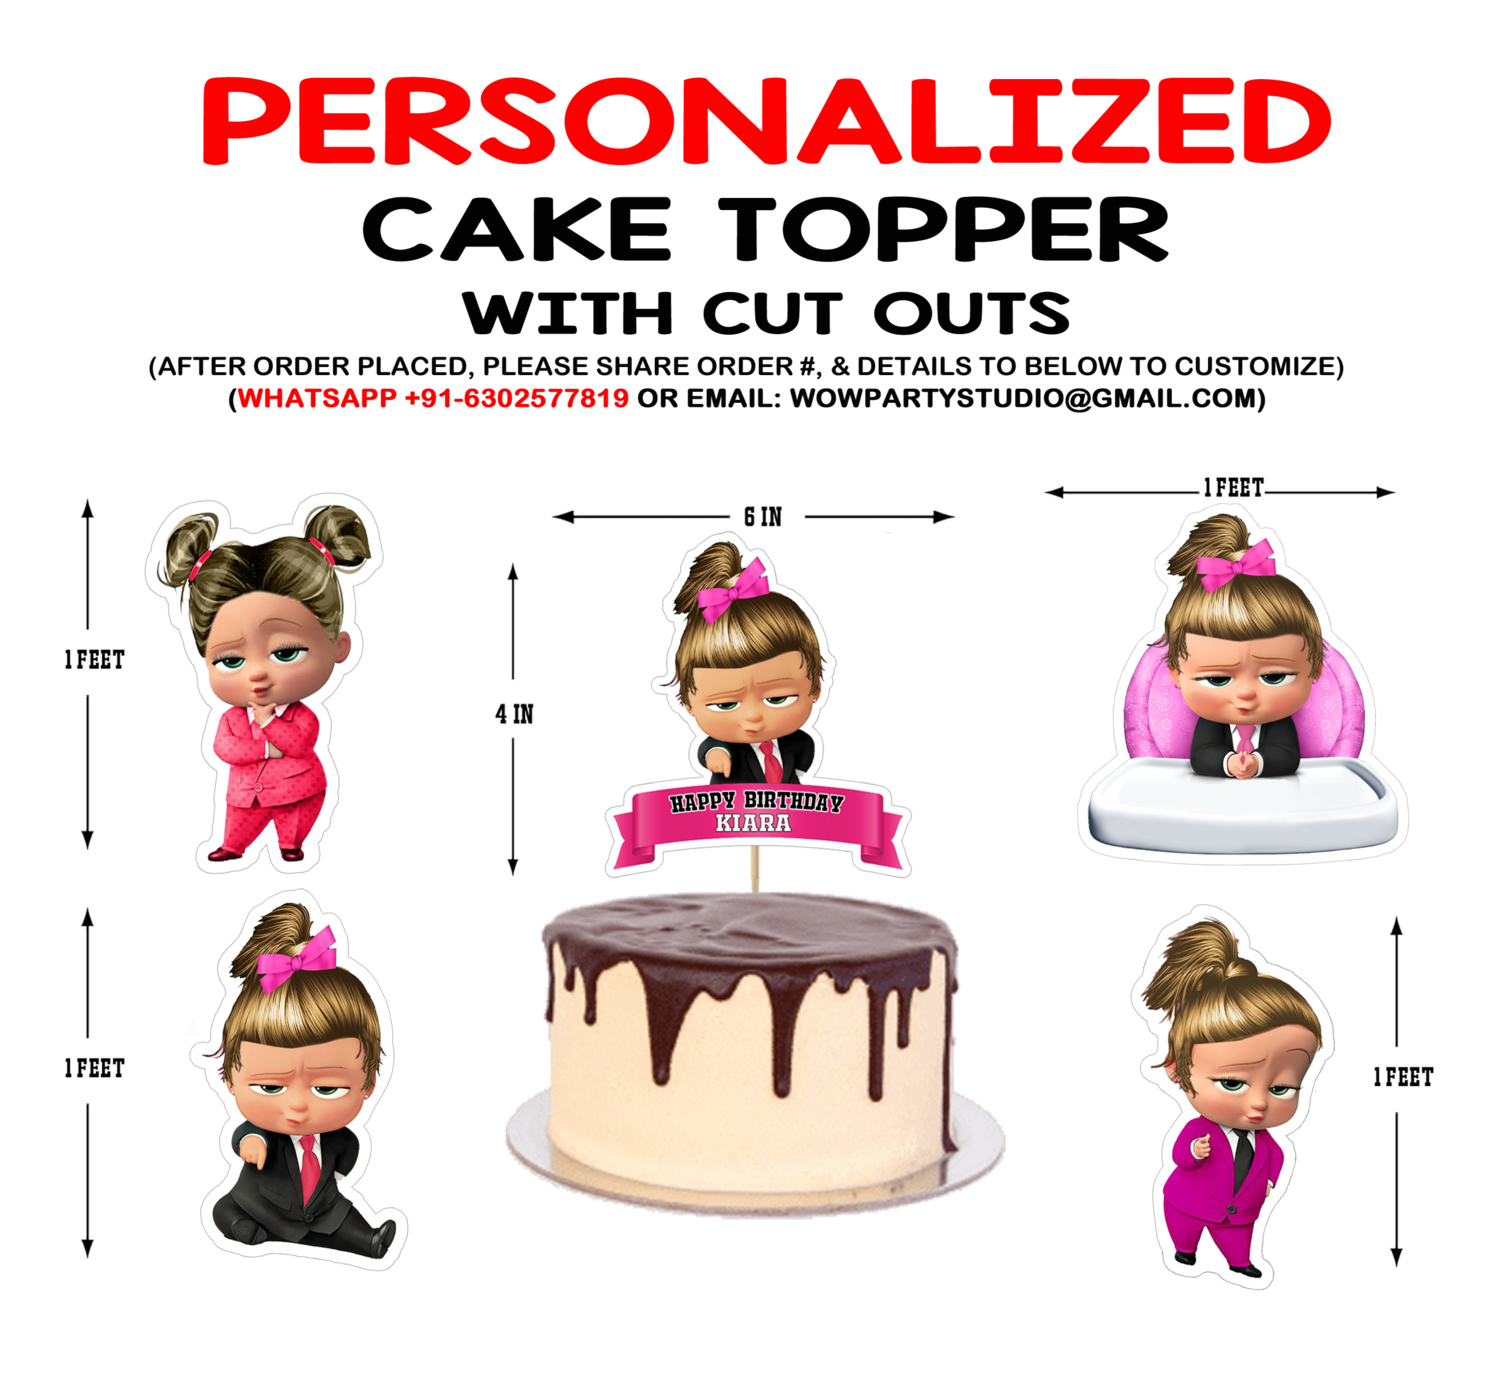 Boss Baby Edible Image Cake Topper Personalized Birthday Sheet Decoration  Custom Party Frosting Transfer Fondant - PartyCreationz